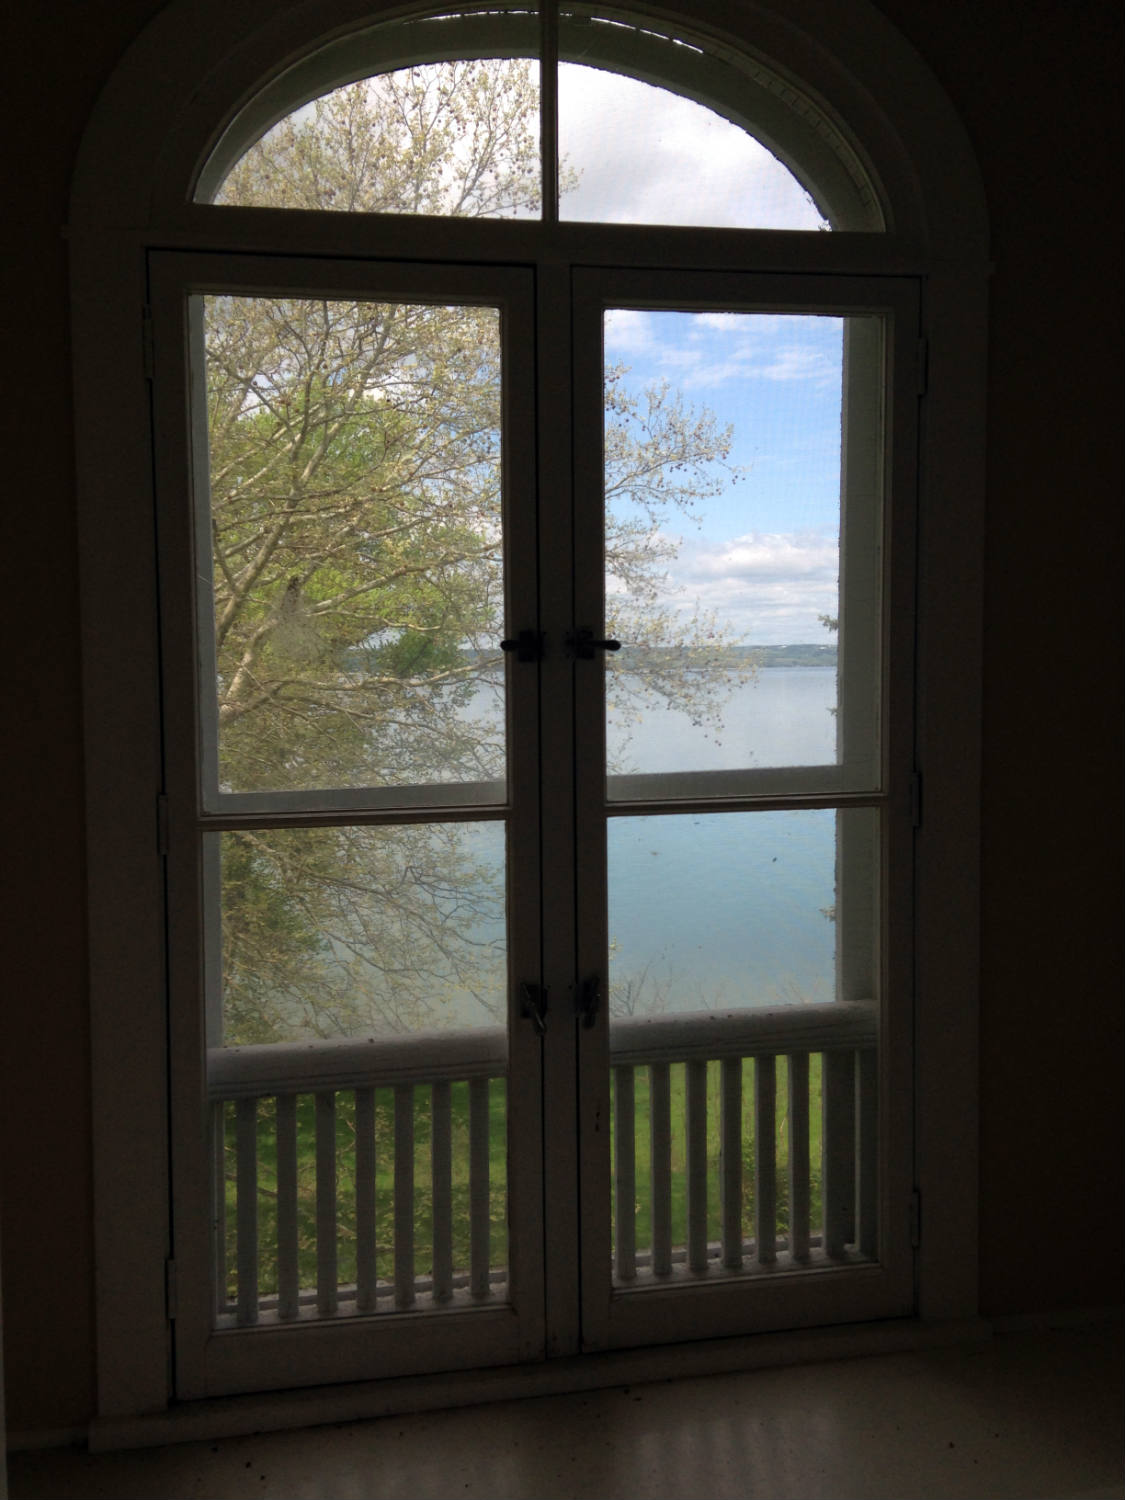 View of Seneca Lake from within the Brookside Building